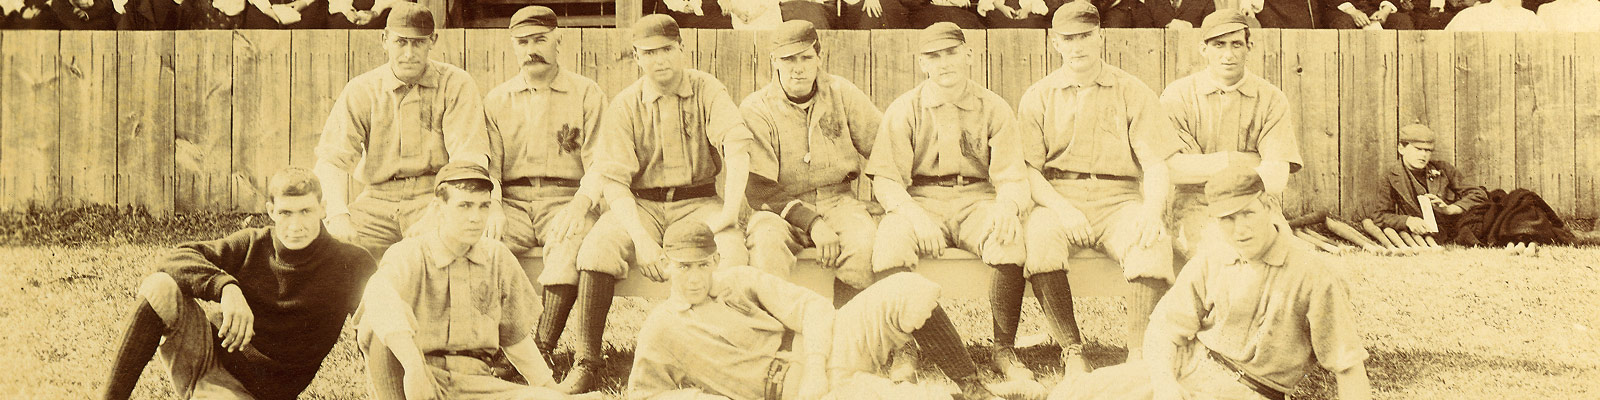 Sepia photo of a baseball team posing together on the baseball diamond. There are two rows of players wearing light coloured uniforms and high dark baseball socks and hats.